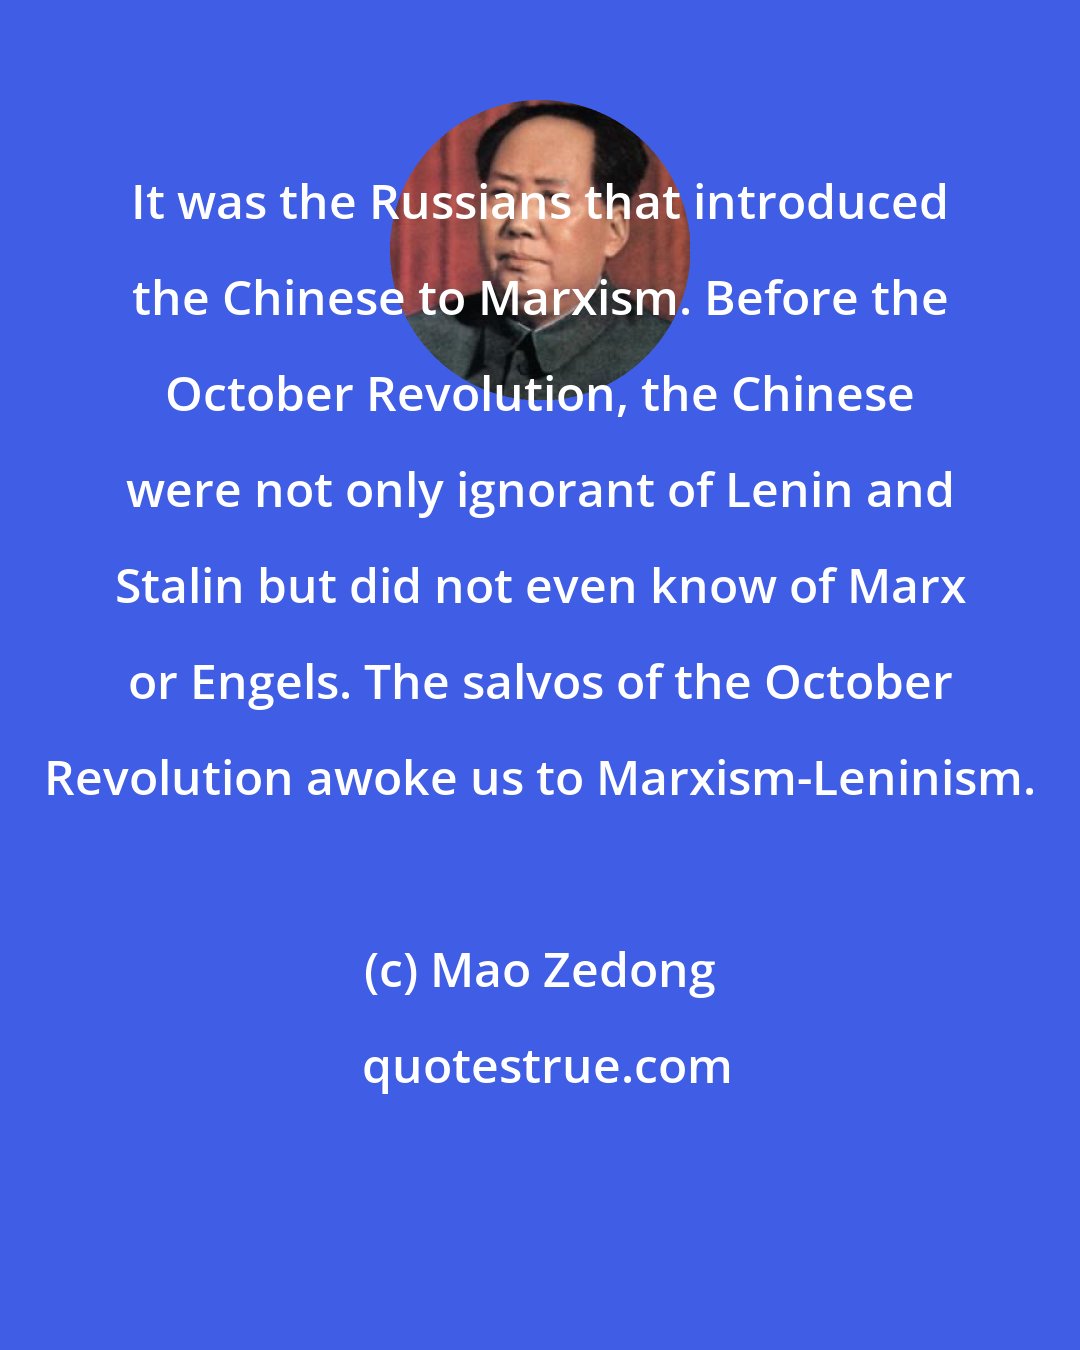 Mao Zedong: It was the Russians that introduced the Chinese to Marxism. Before the October Revolution, the Chinese were not only ignorant of Lenin and Stalin but did not even know of Marx or Engels. The salvos of the October Revolution awoke us to Marxism-Leninism.